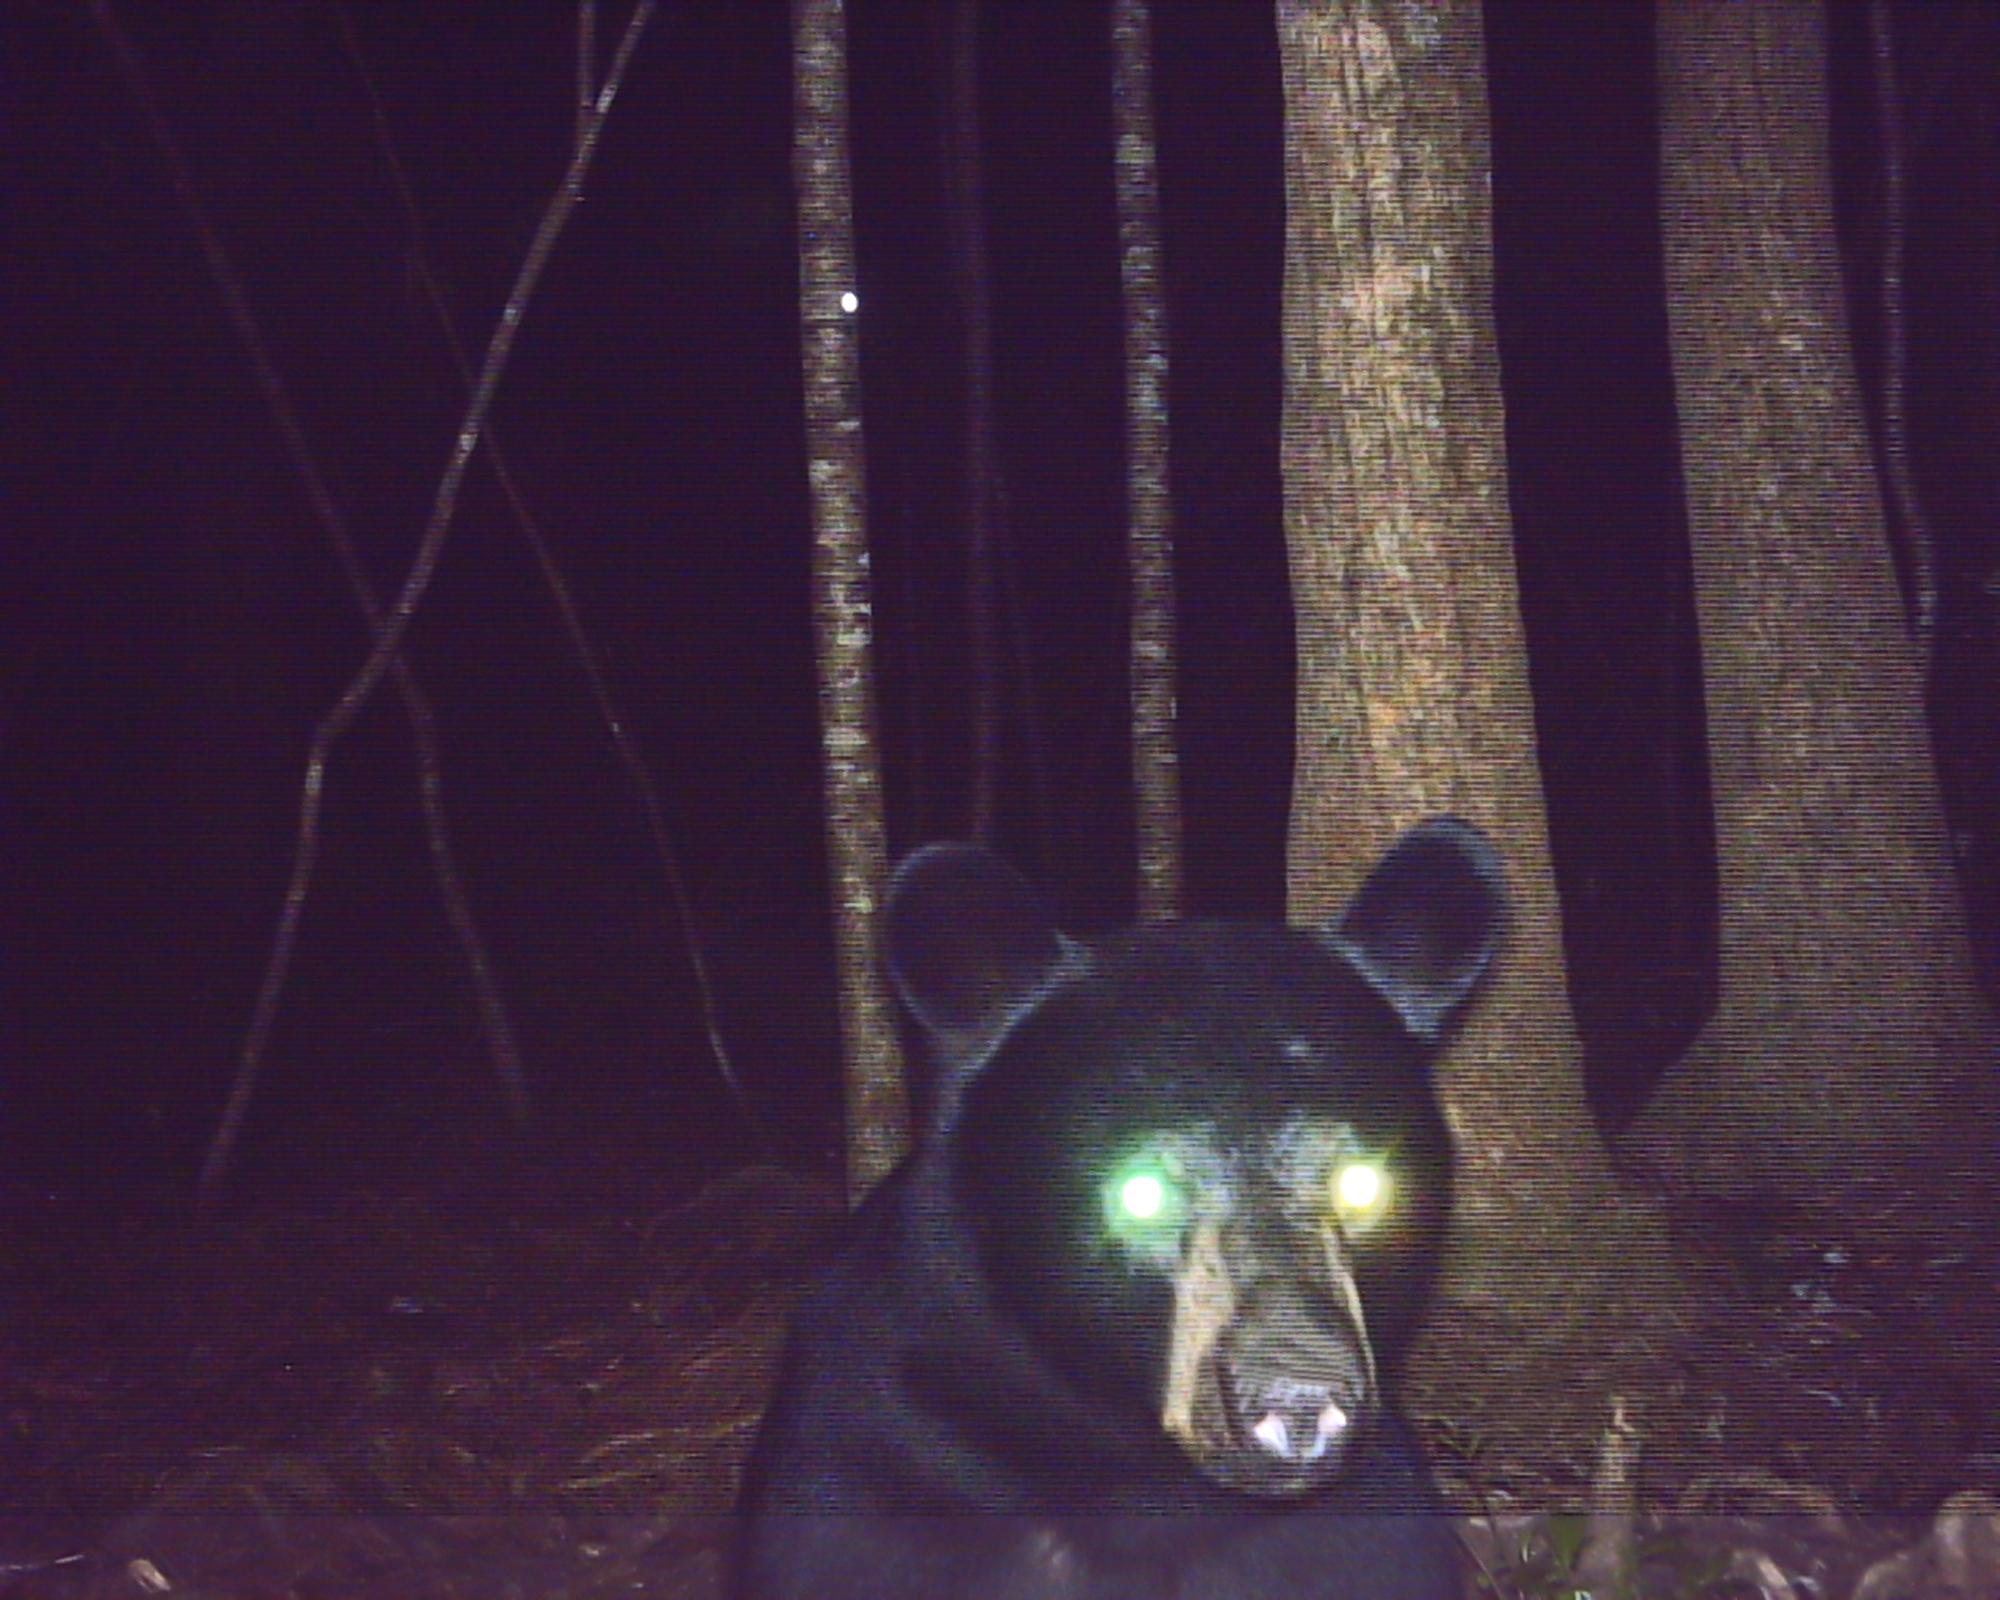 Black bear caught on nighttime trail camera in a forest